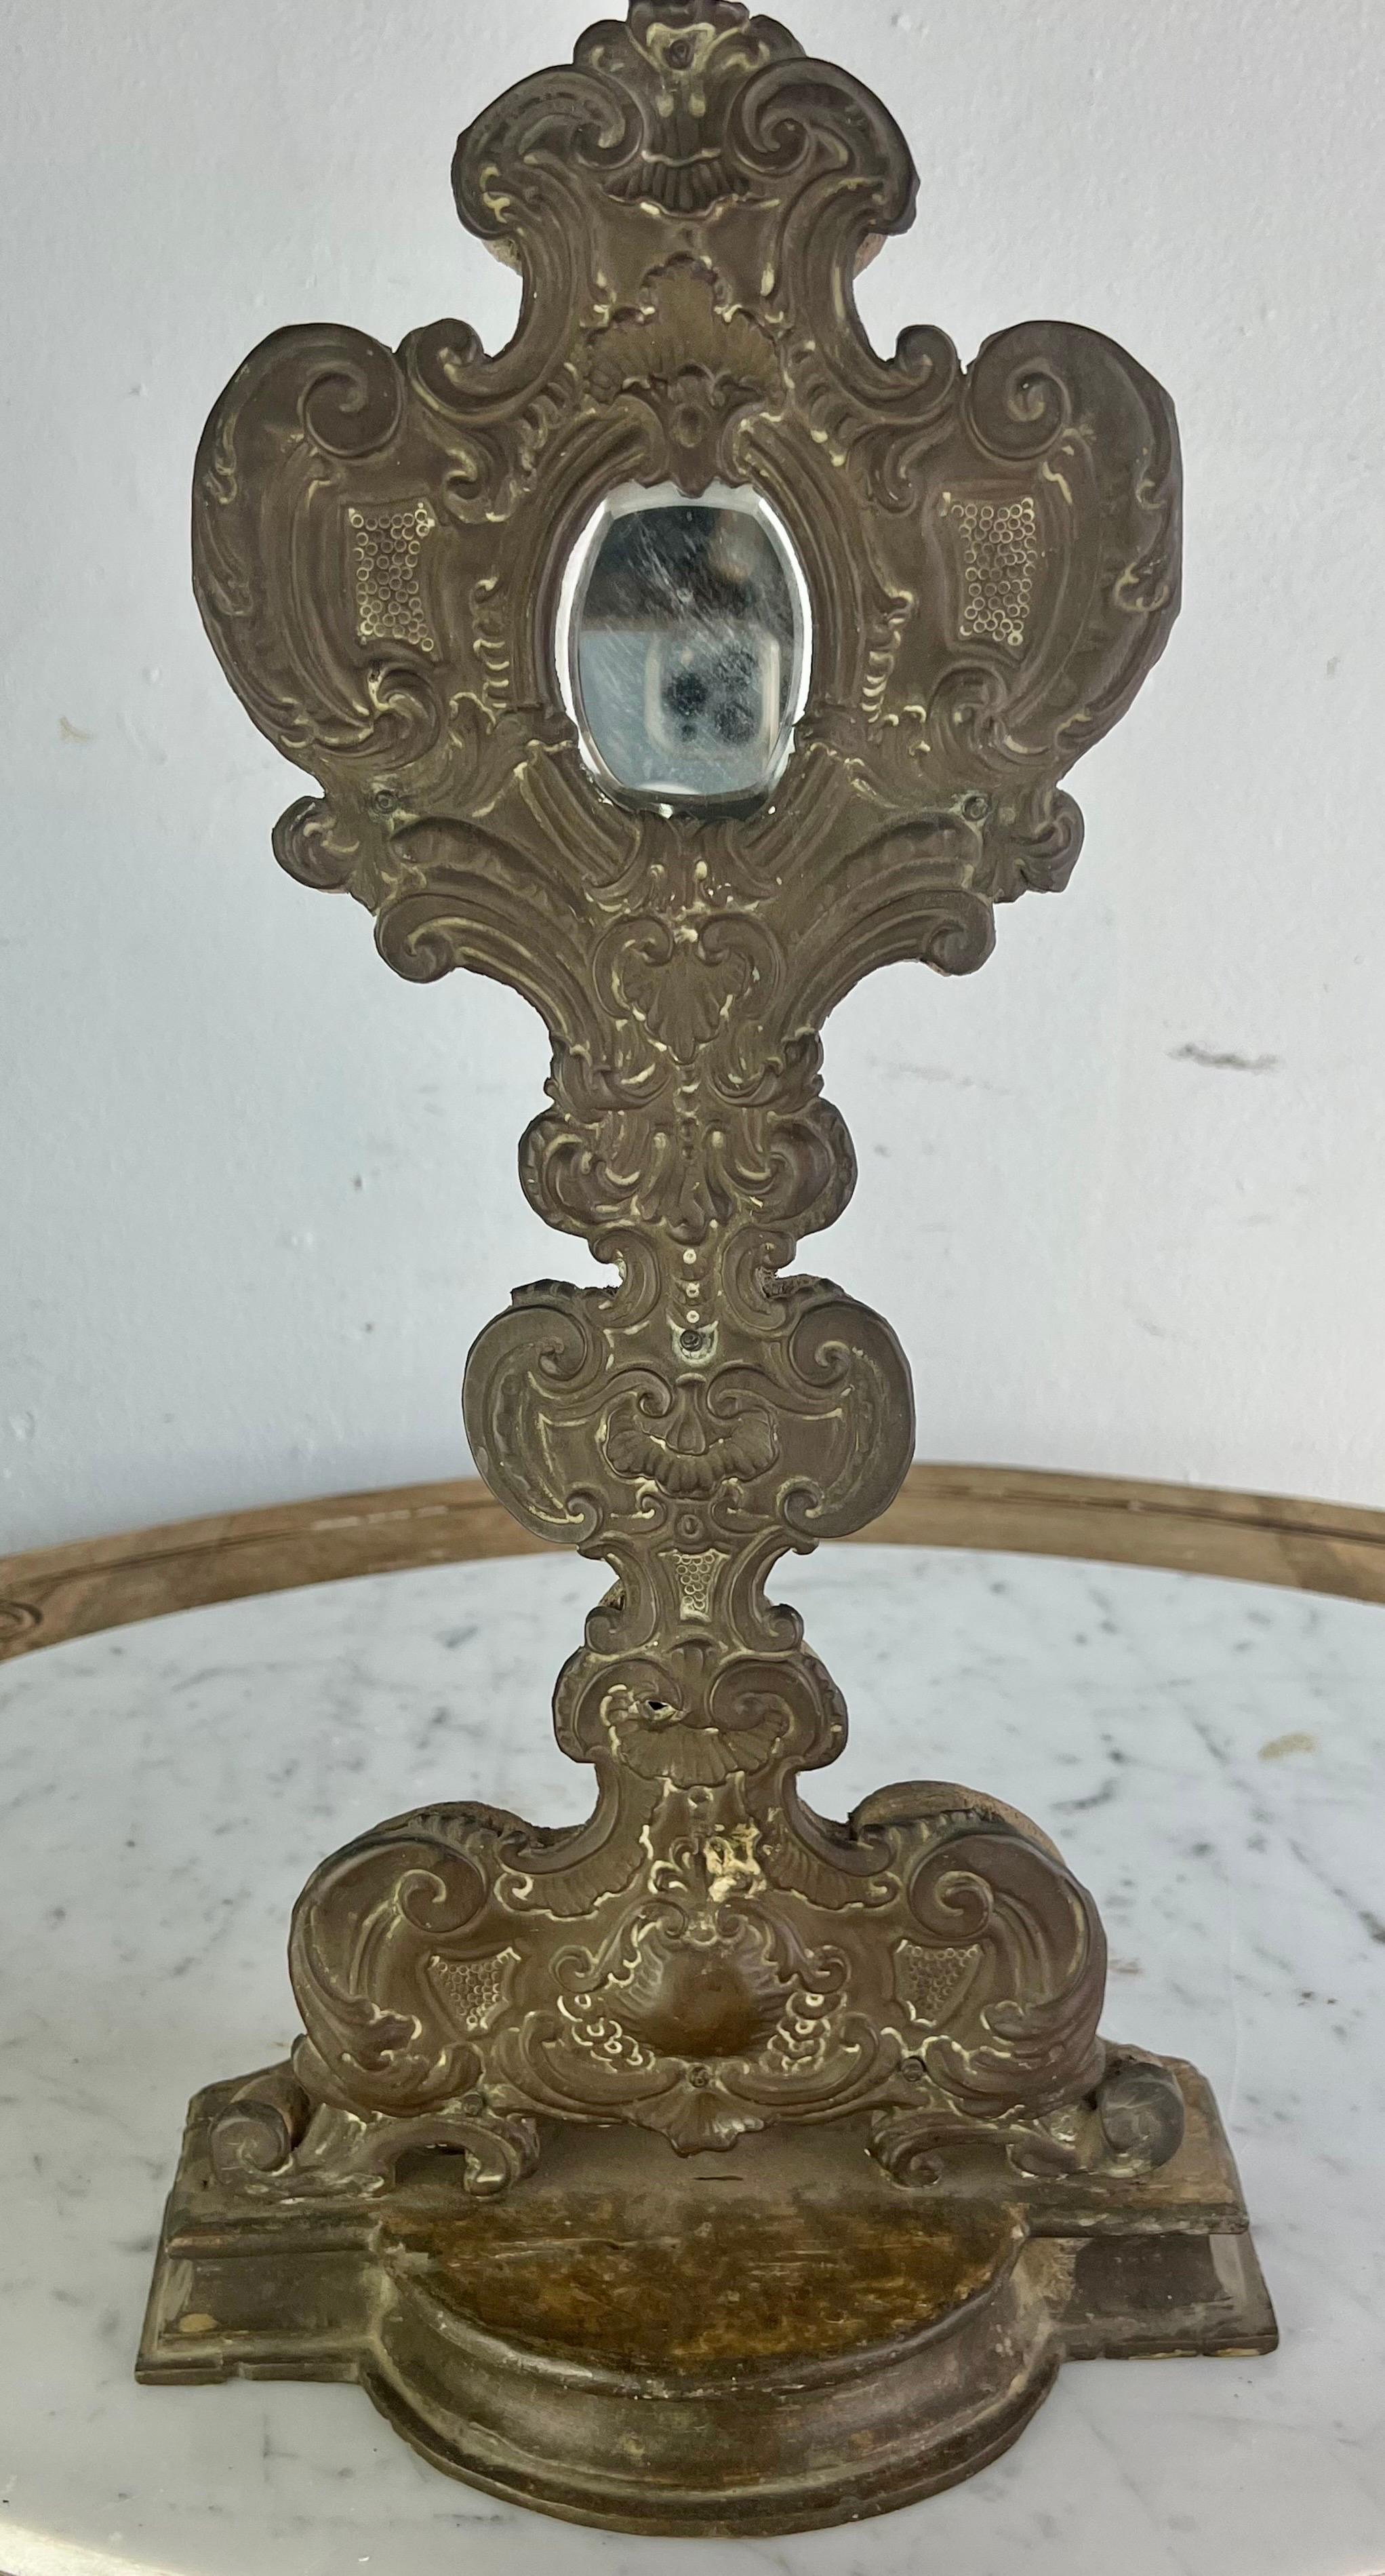 19th Century wood & embossed metal relicquary. The piece originally sat on the alter of the church holding relics. Mirror has been placed where the glass originally held the relics.